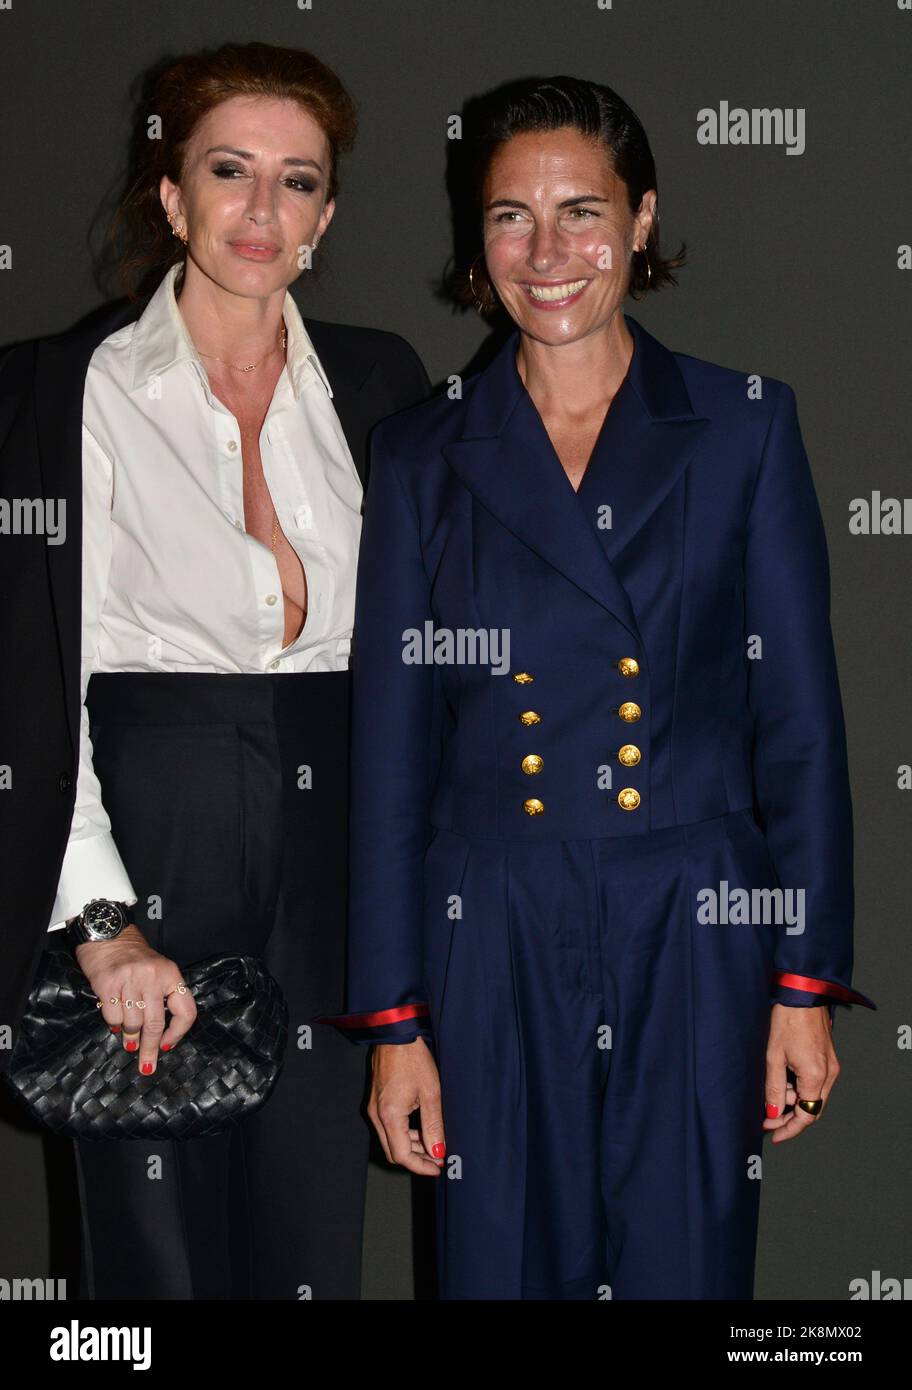 Albane Cleret, Alessandra Sublet Photocall of the Kering 'Women in Motion Award' evening, Place de la Castre, colline du Suquet 75th Cannes Film Festival May 22, 2022 Stock Photo